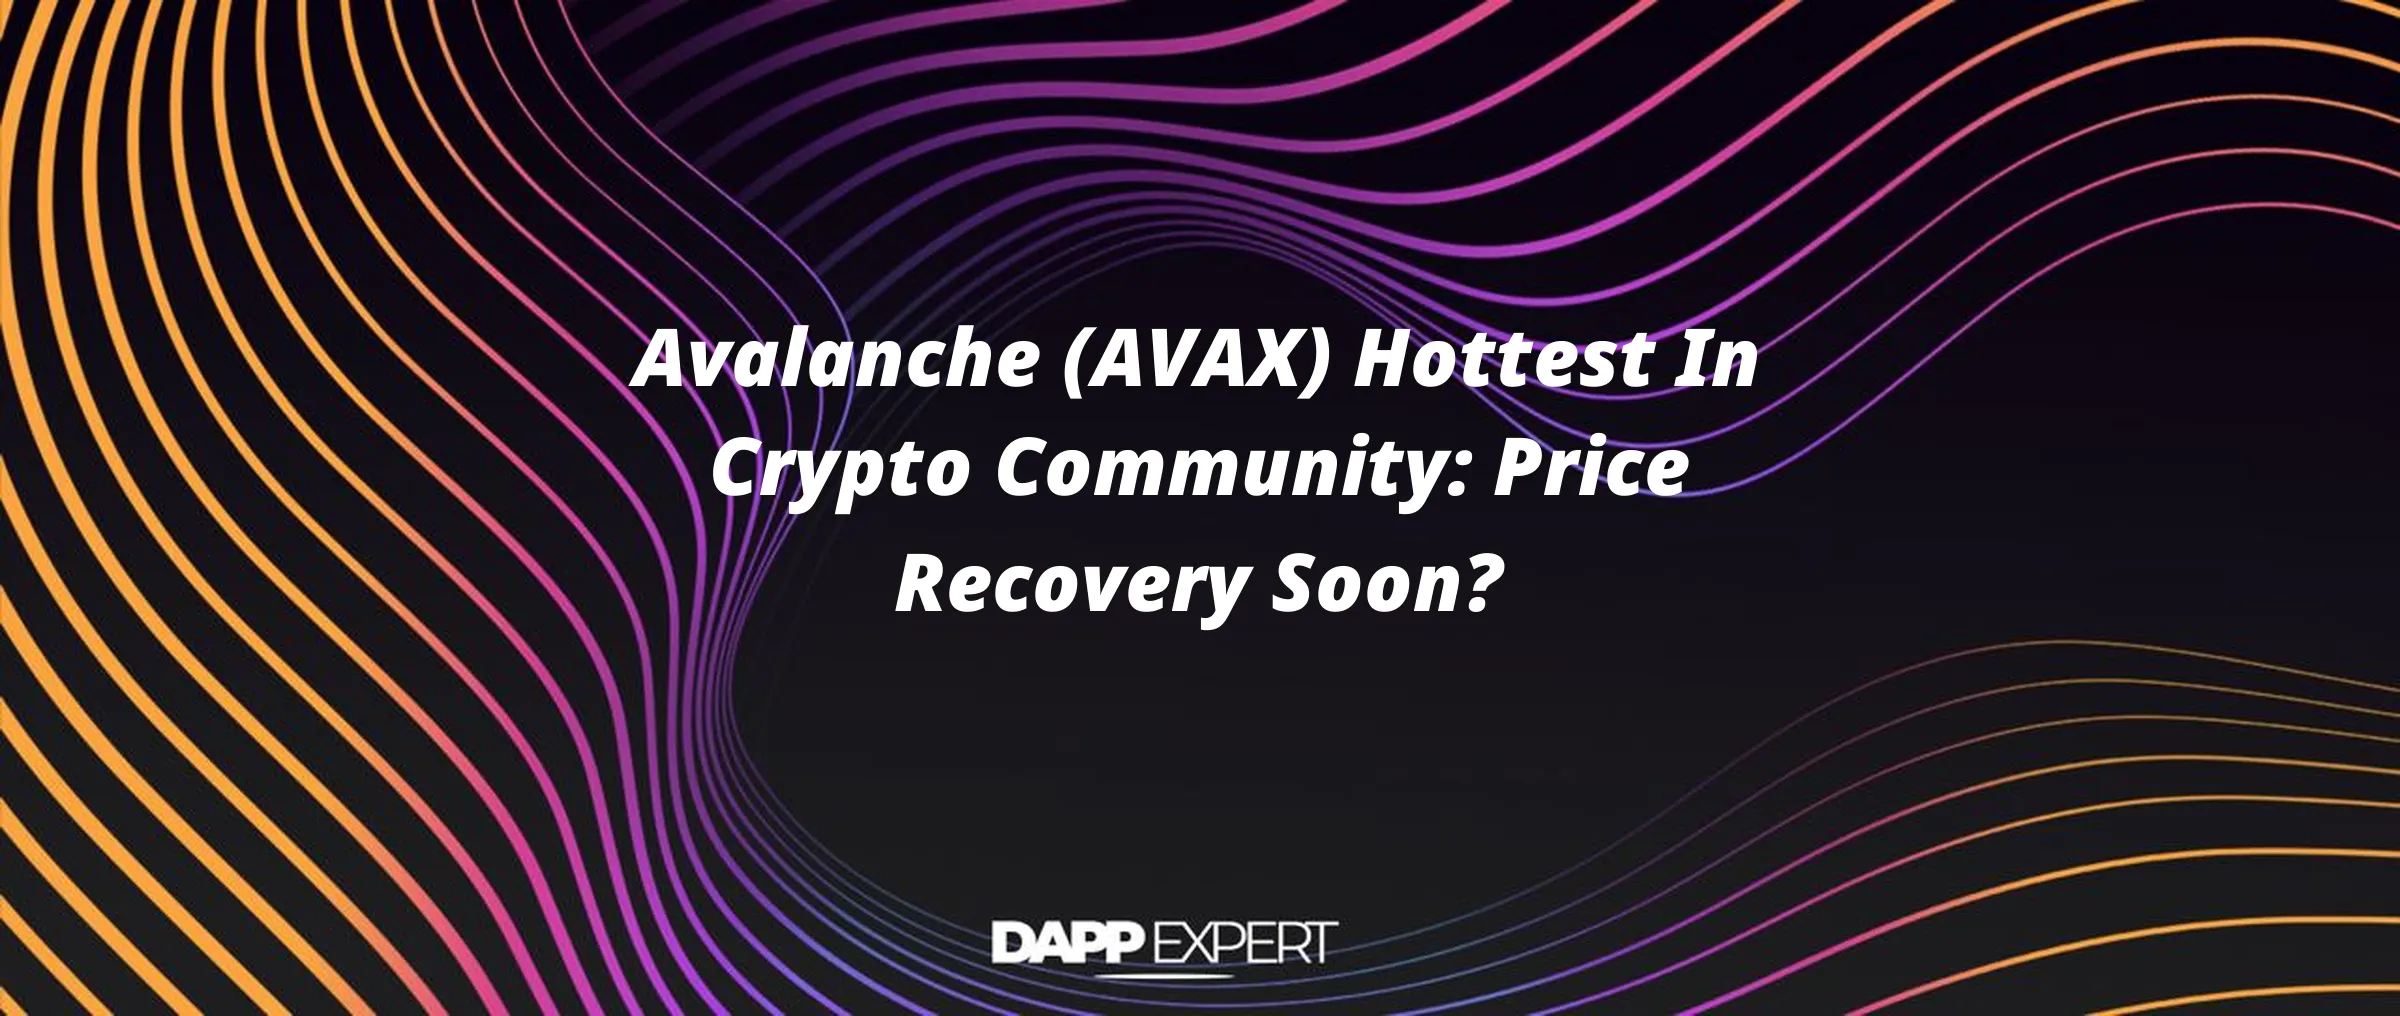 Avalanche (AVAX) Hottest In Crypto Community: Price Recovery Soon?